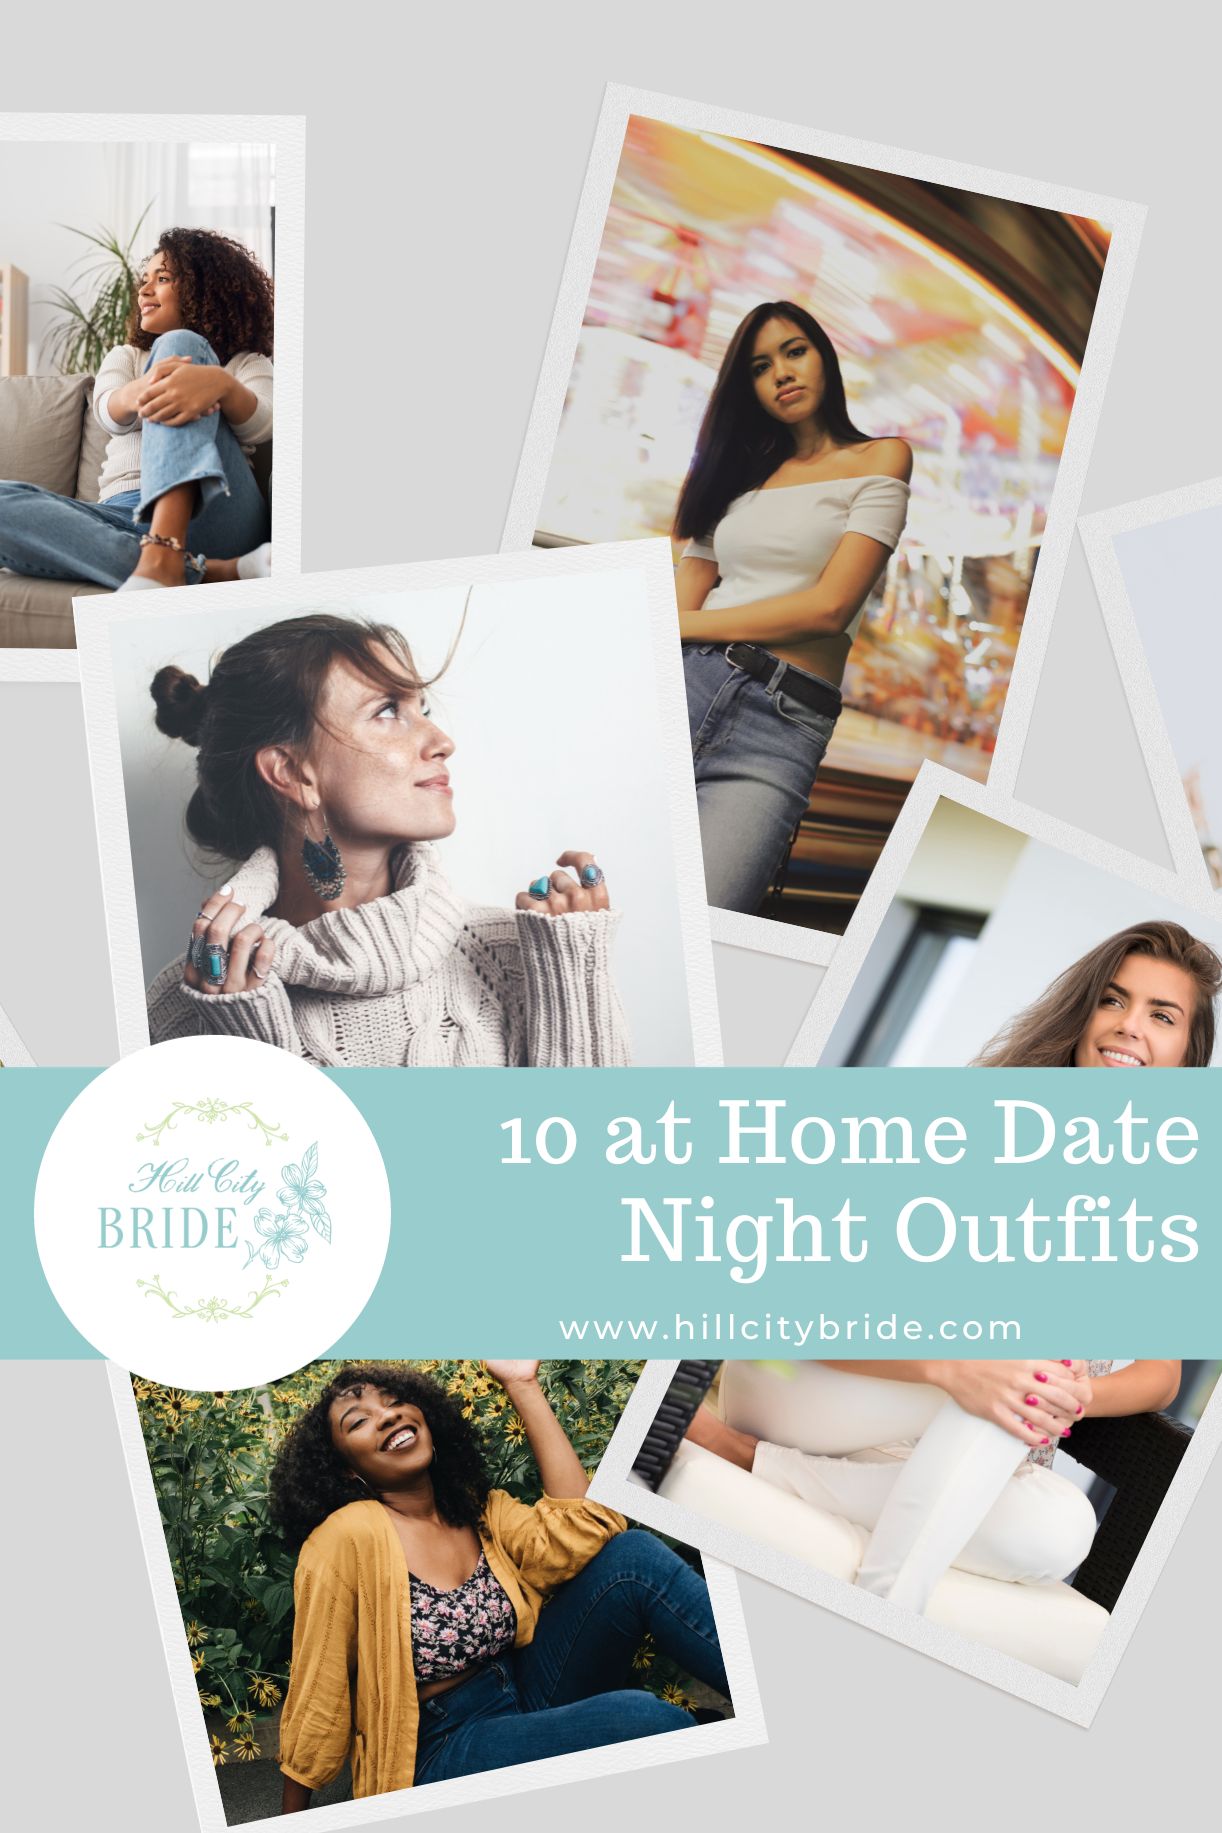 10 Attractive Stay at Home Date Night Outfits You'll Love